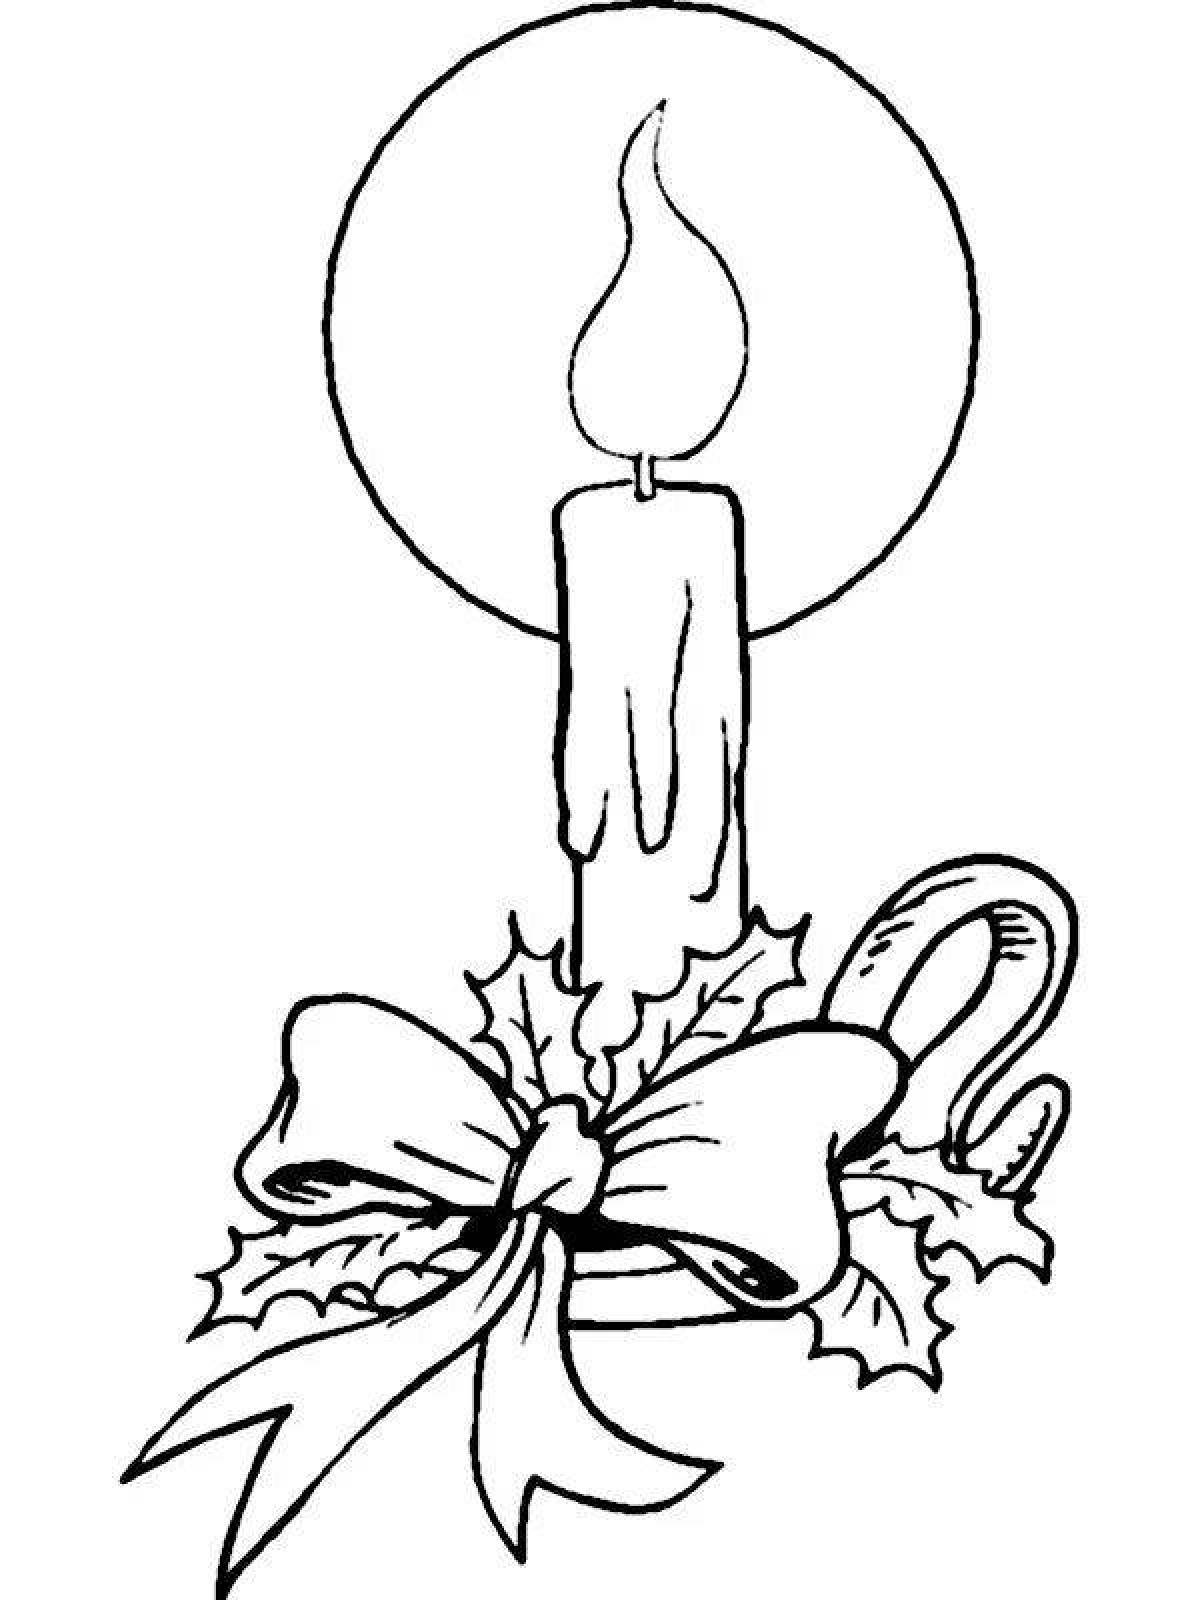 Coloring book shining Christmas candle